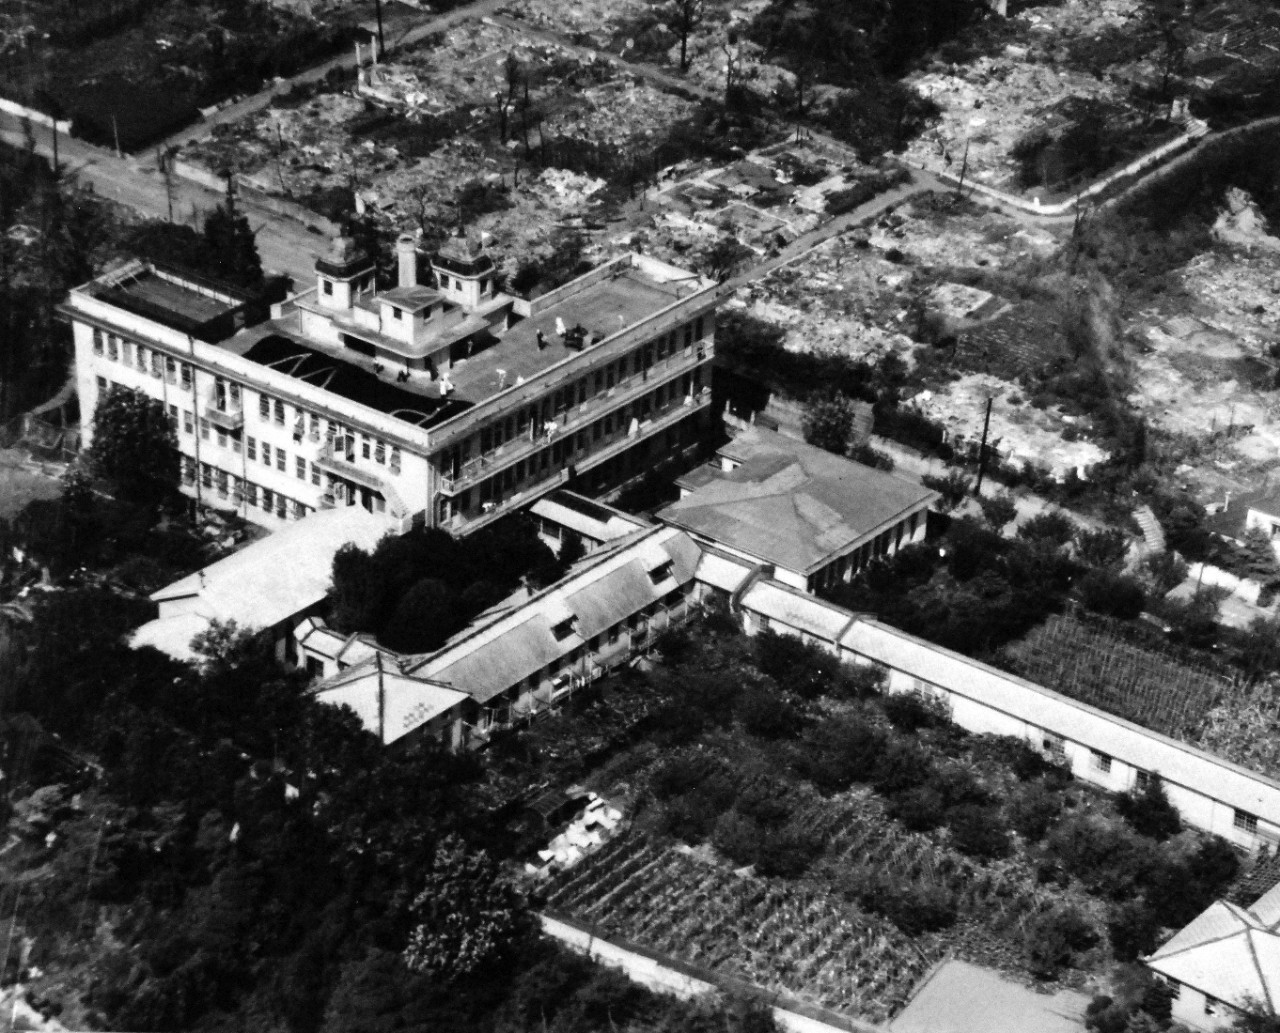 80-G-344489:   Allied Prisoner of War Building, Tokyo, Japan, 1945.    Prisoner of War building at Tokyo, Japan, with people on the roof.  Taken by plane from USS Essex (CV-9), PHOM1/C P.J.Madden, PHOM3/C H.C. Stoker, August 28, 1945. Official U.S. Navy photograph, now in the collection of the National Archives.  (2014/05/22).    The original photograph is small.   